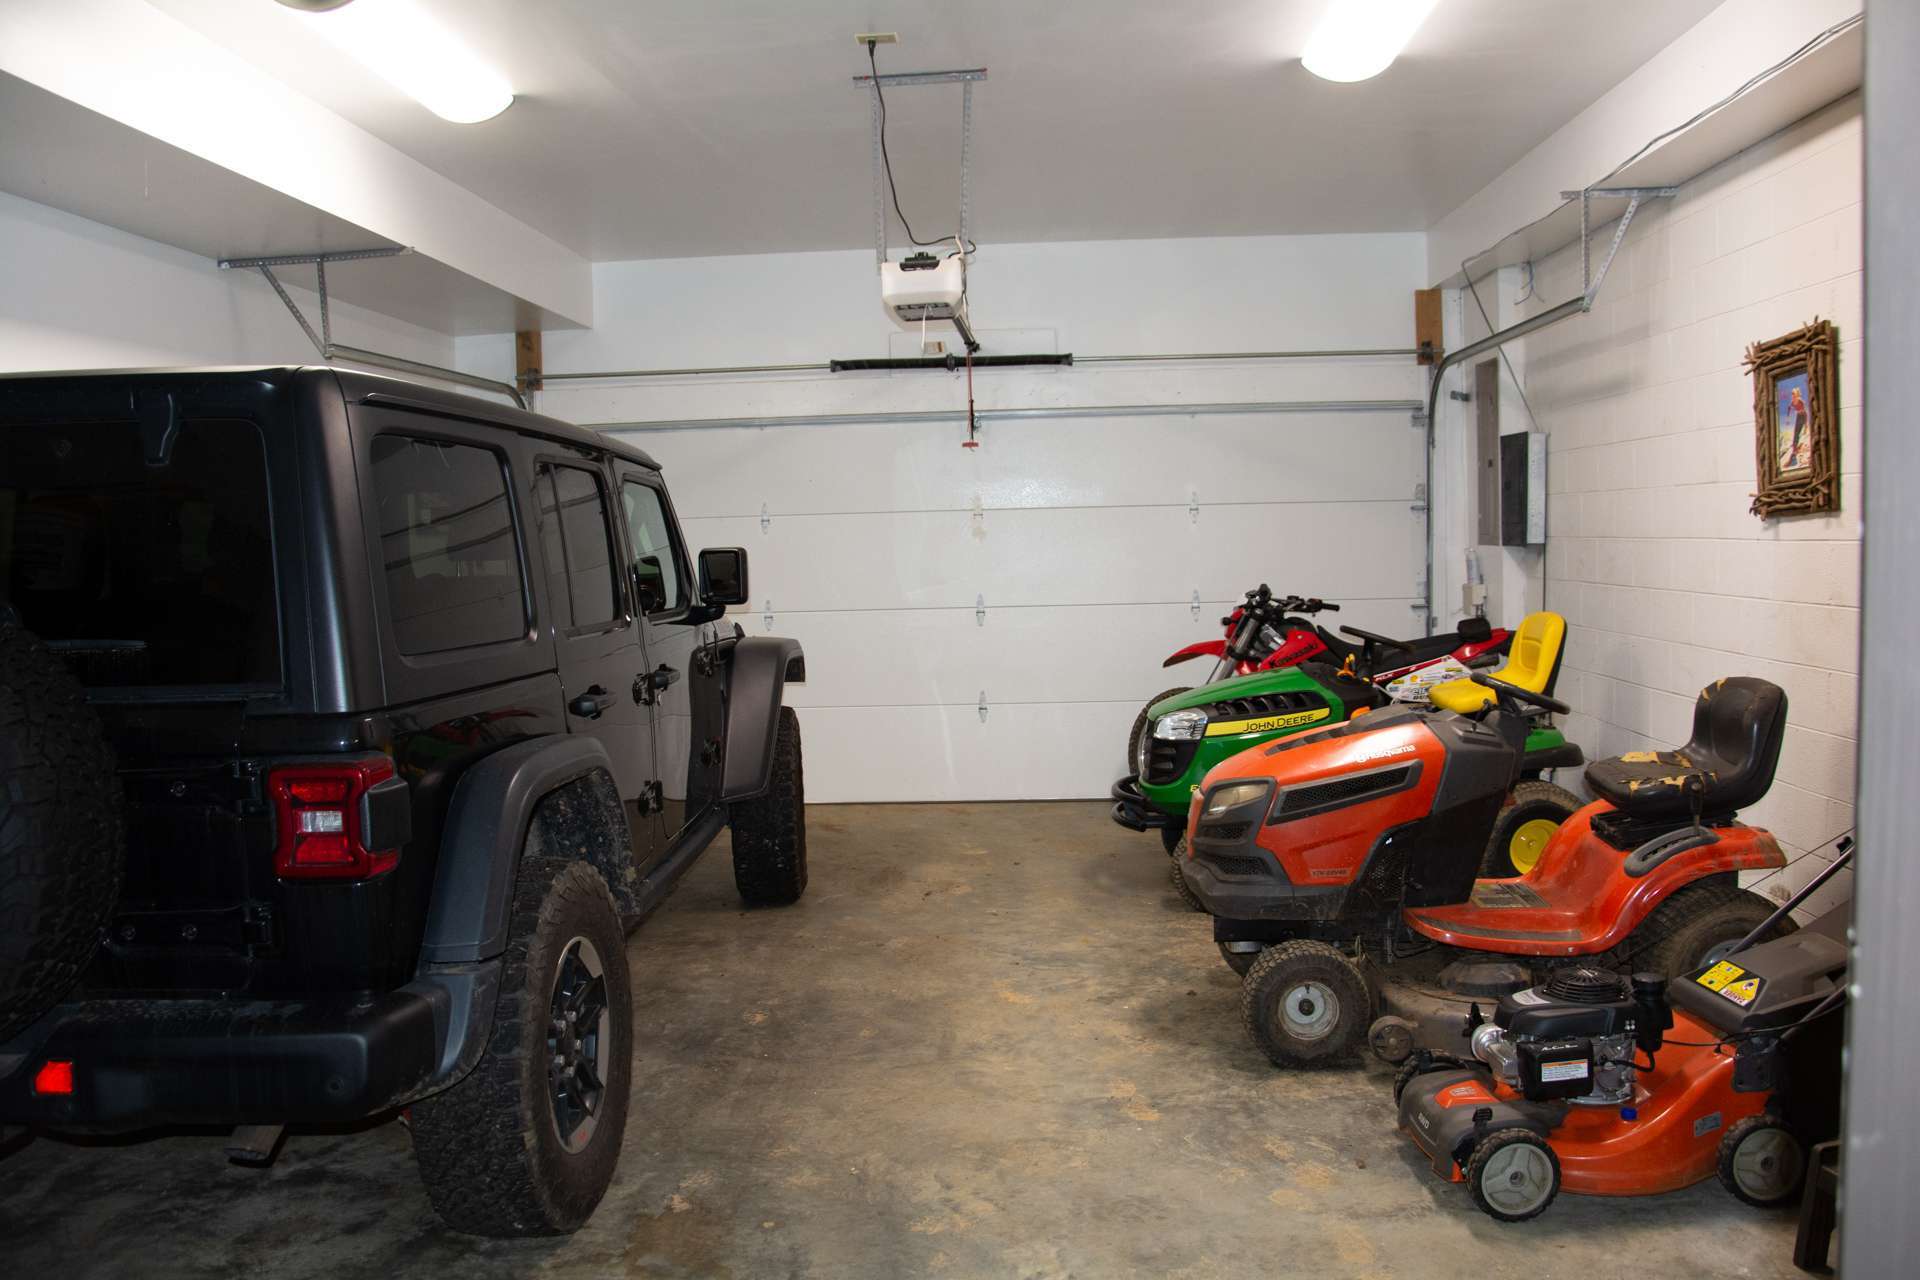 The 2-car garage completes the lower level and offers plenty of storage space.